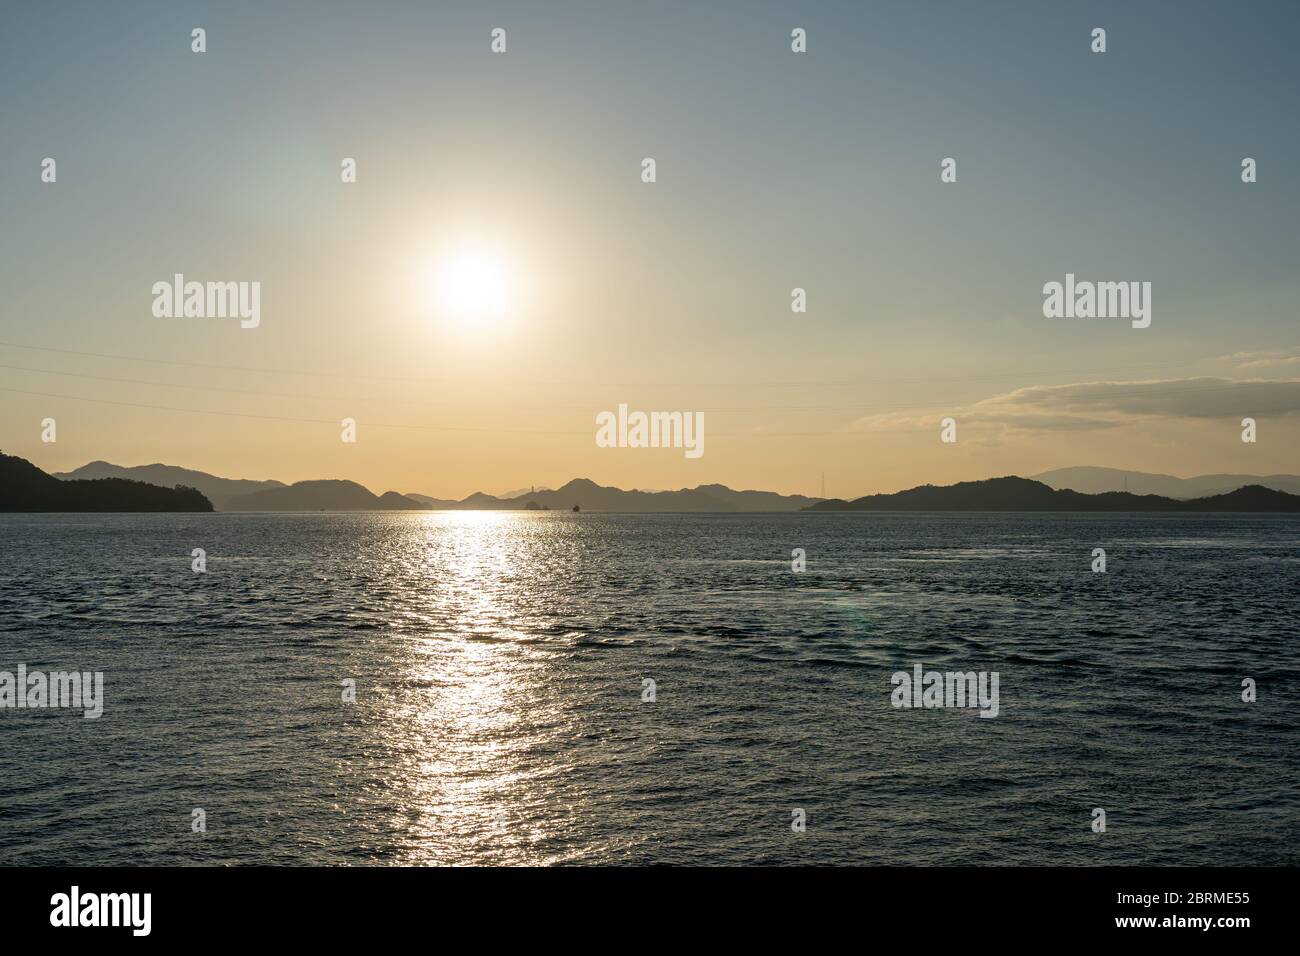 Islands of the Seto Inland Sea in sunset time. Hiroshima Prefecture, Japan Stock Photo